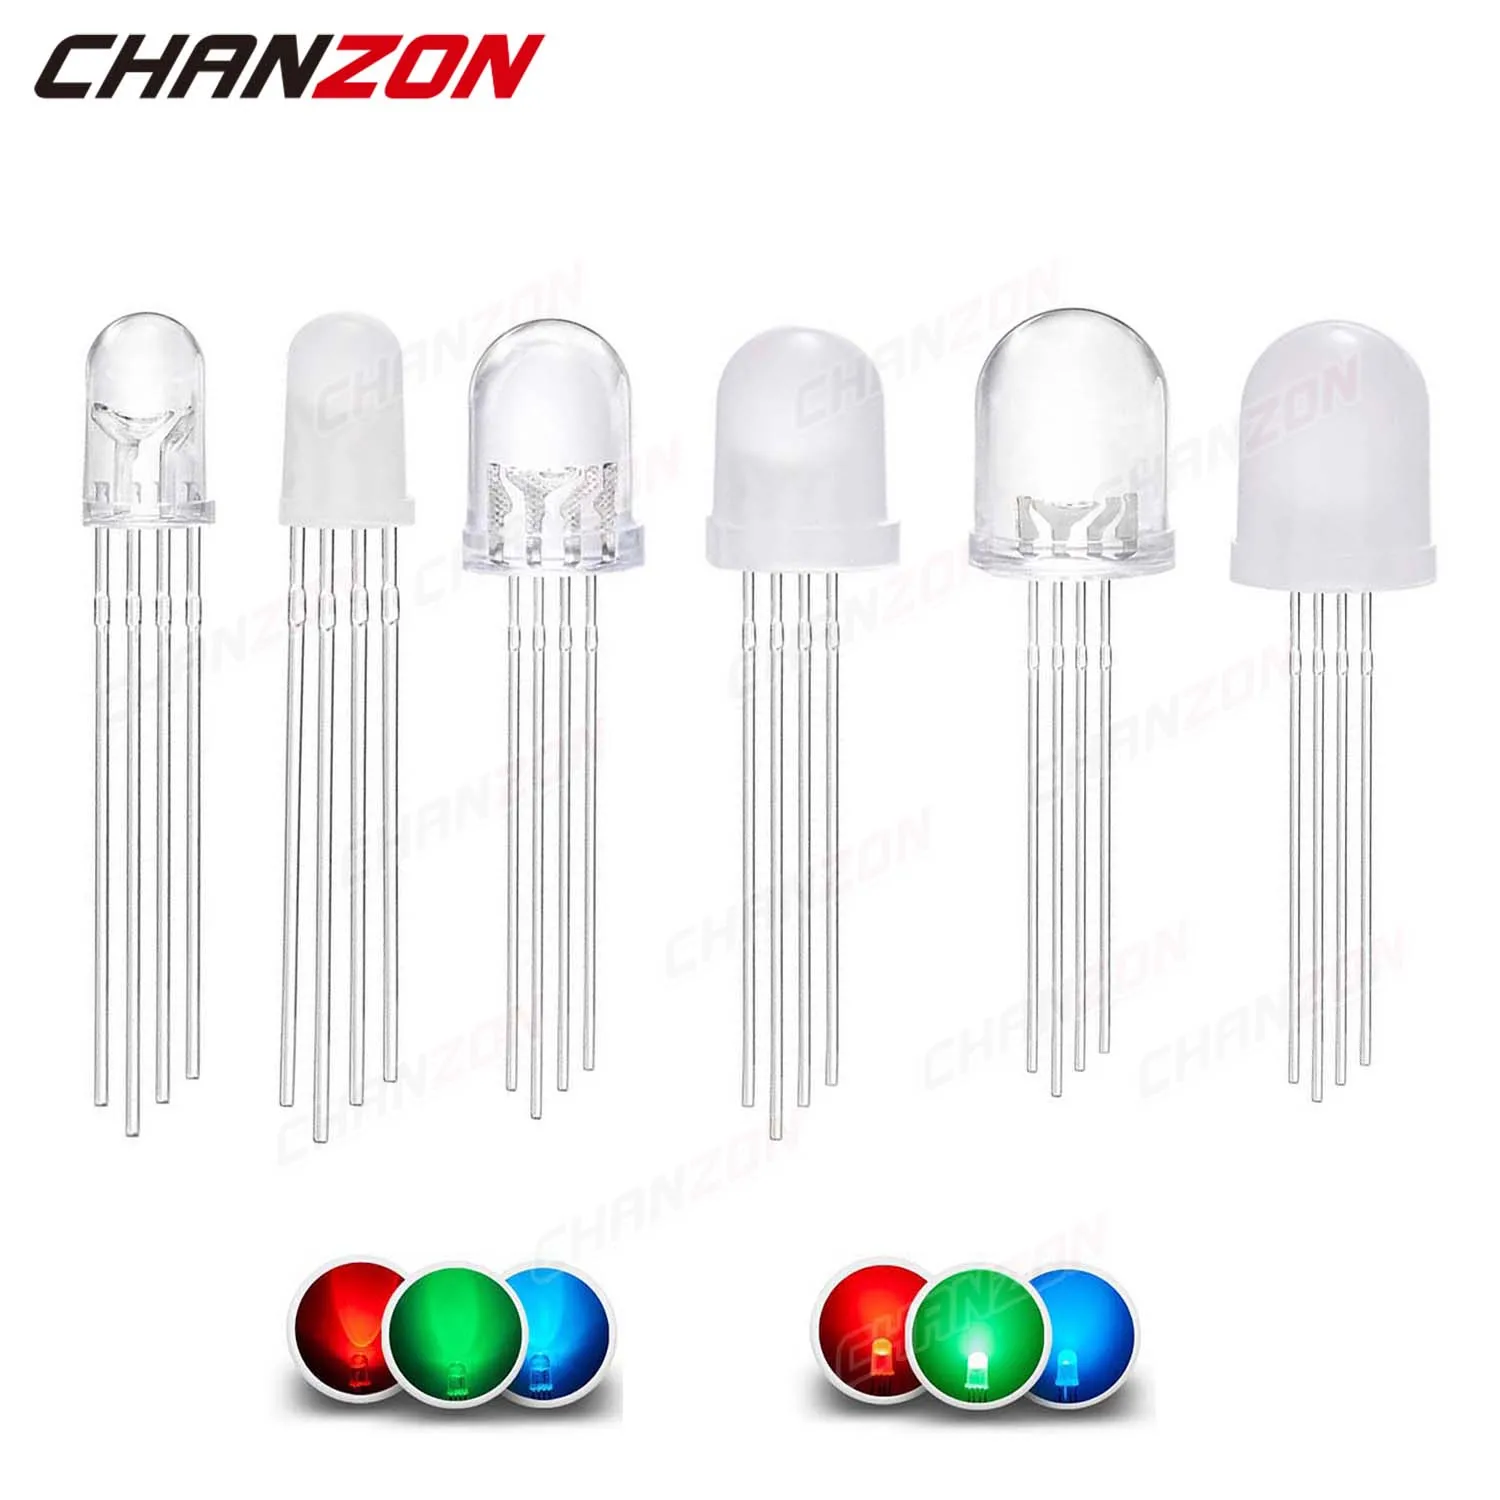 5mm 8mm 10mm Led Diode RGB Light Emitting 4 Pin Common Anode Cathode Tricolor Multicolor Clear Diffused DIY PCB Lamp Bulb